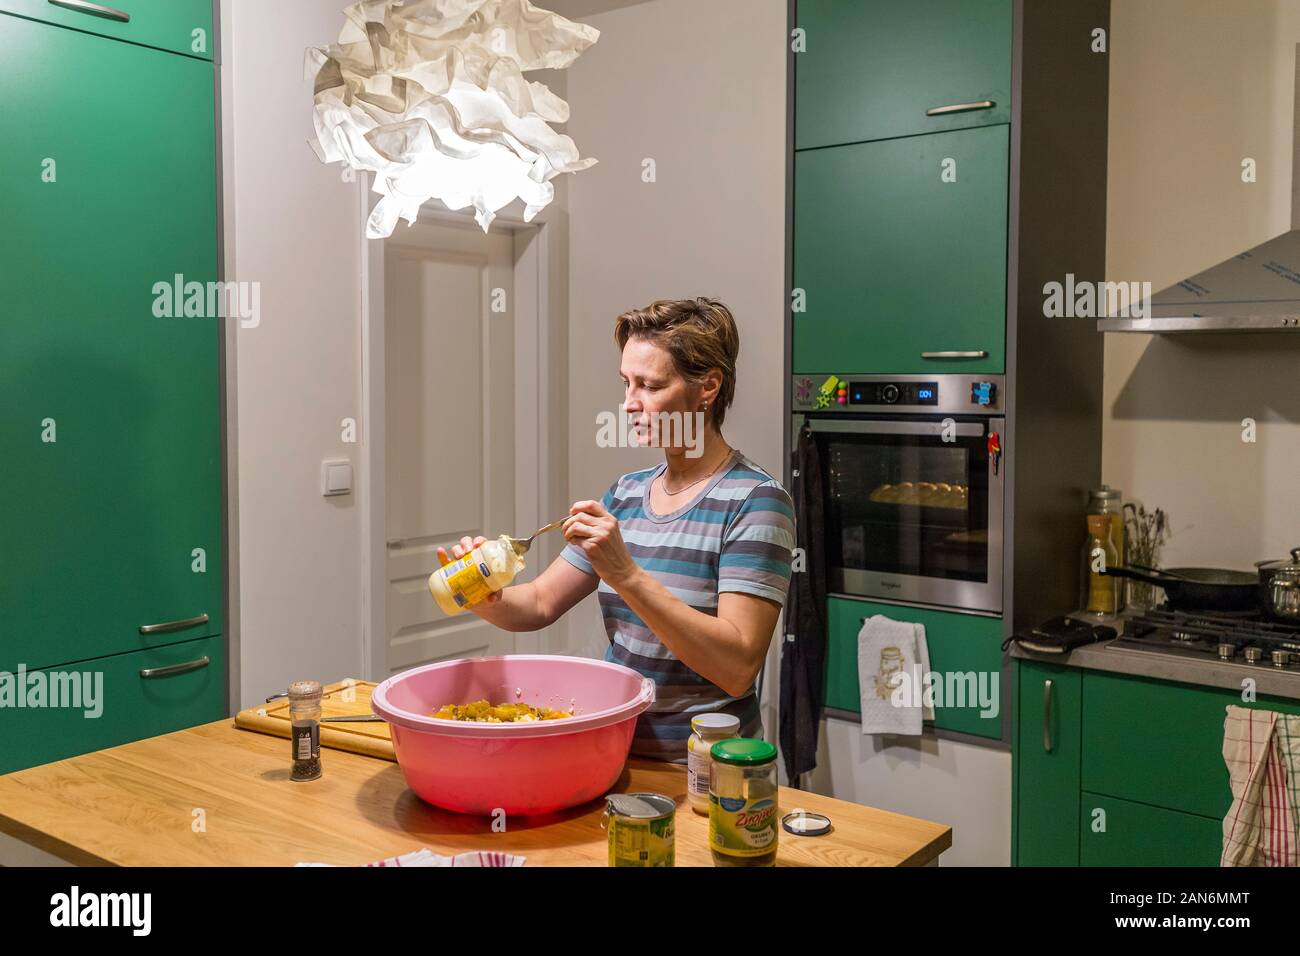 woman prepareing lot of meal in plastic tub in the kitchen Stock Photo